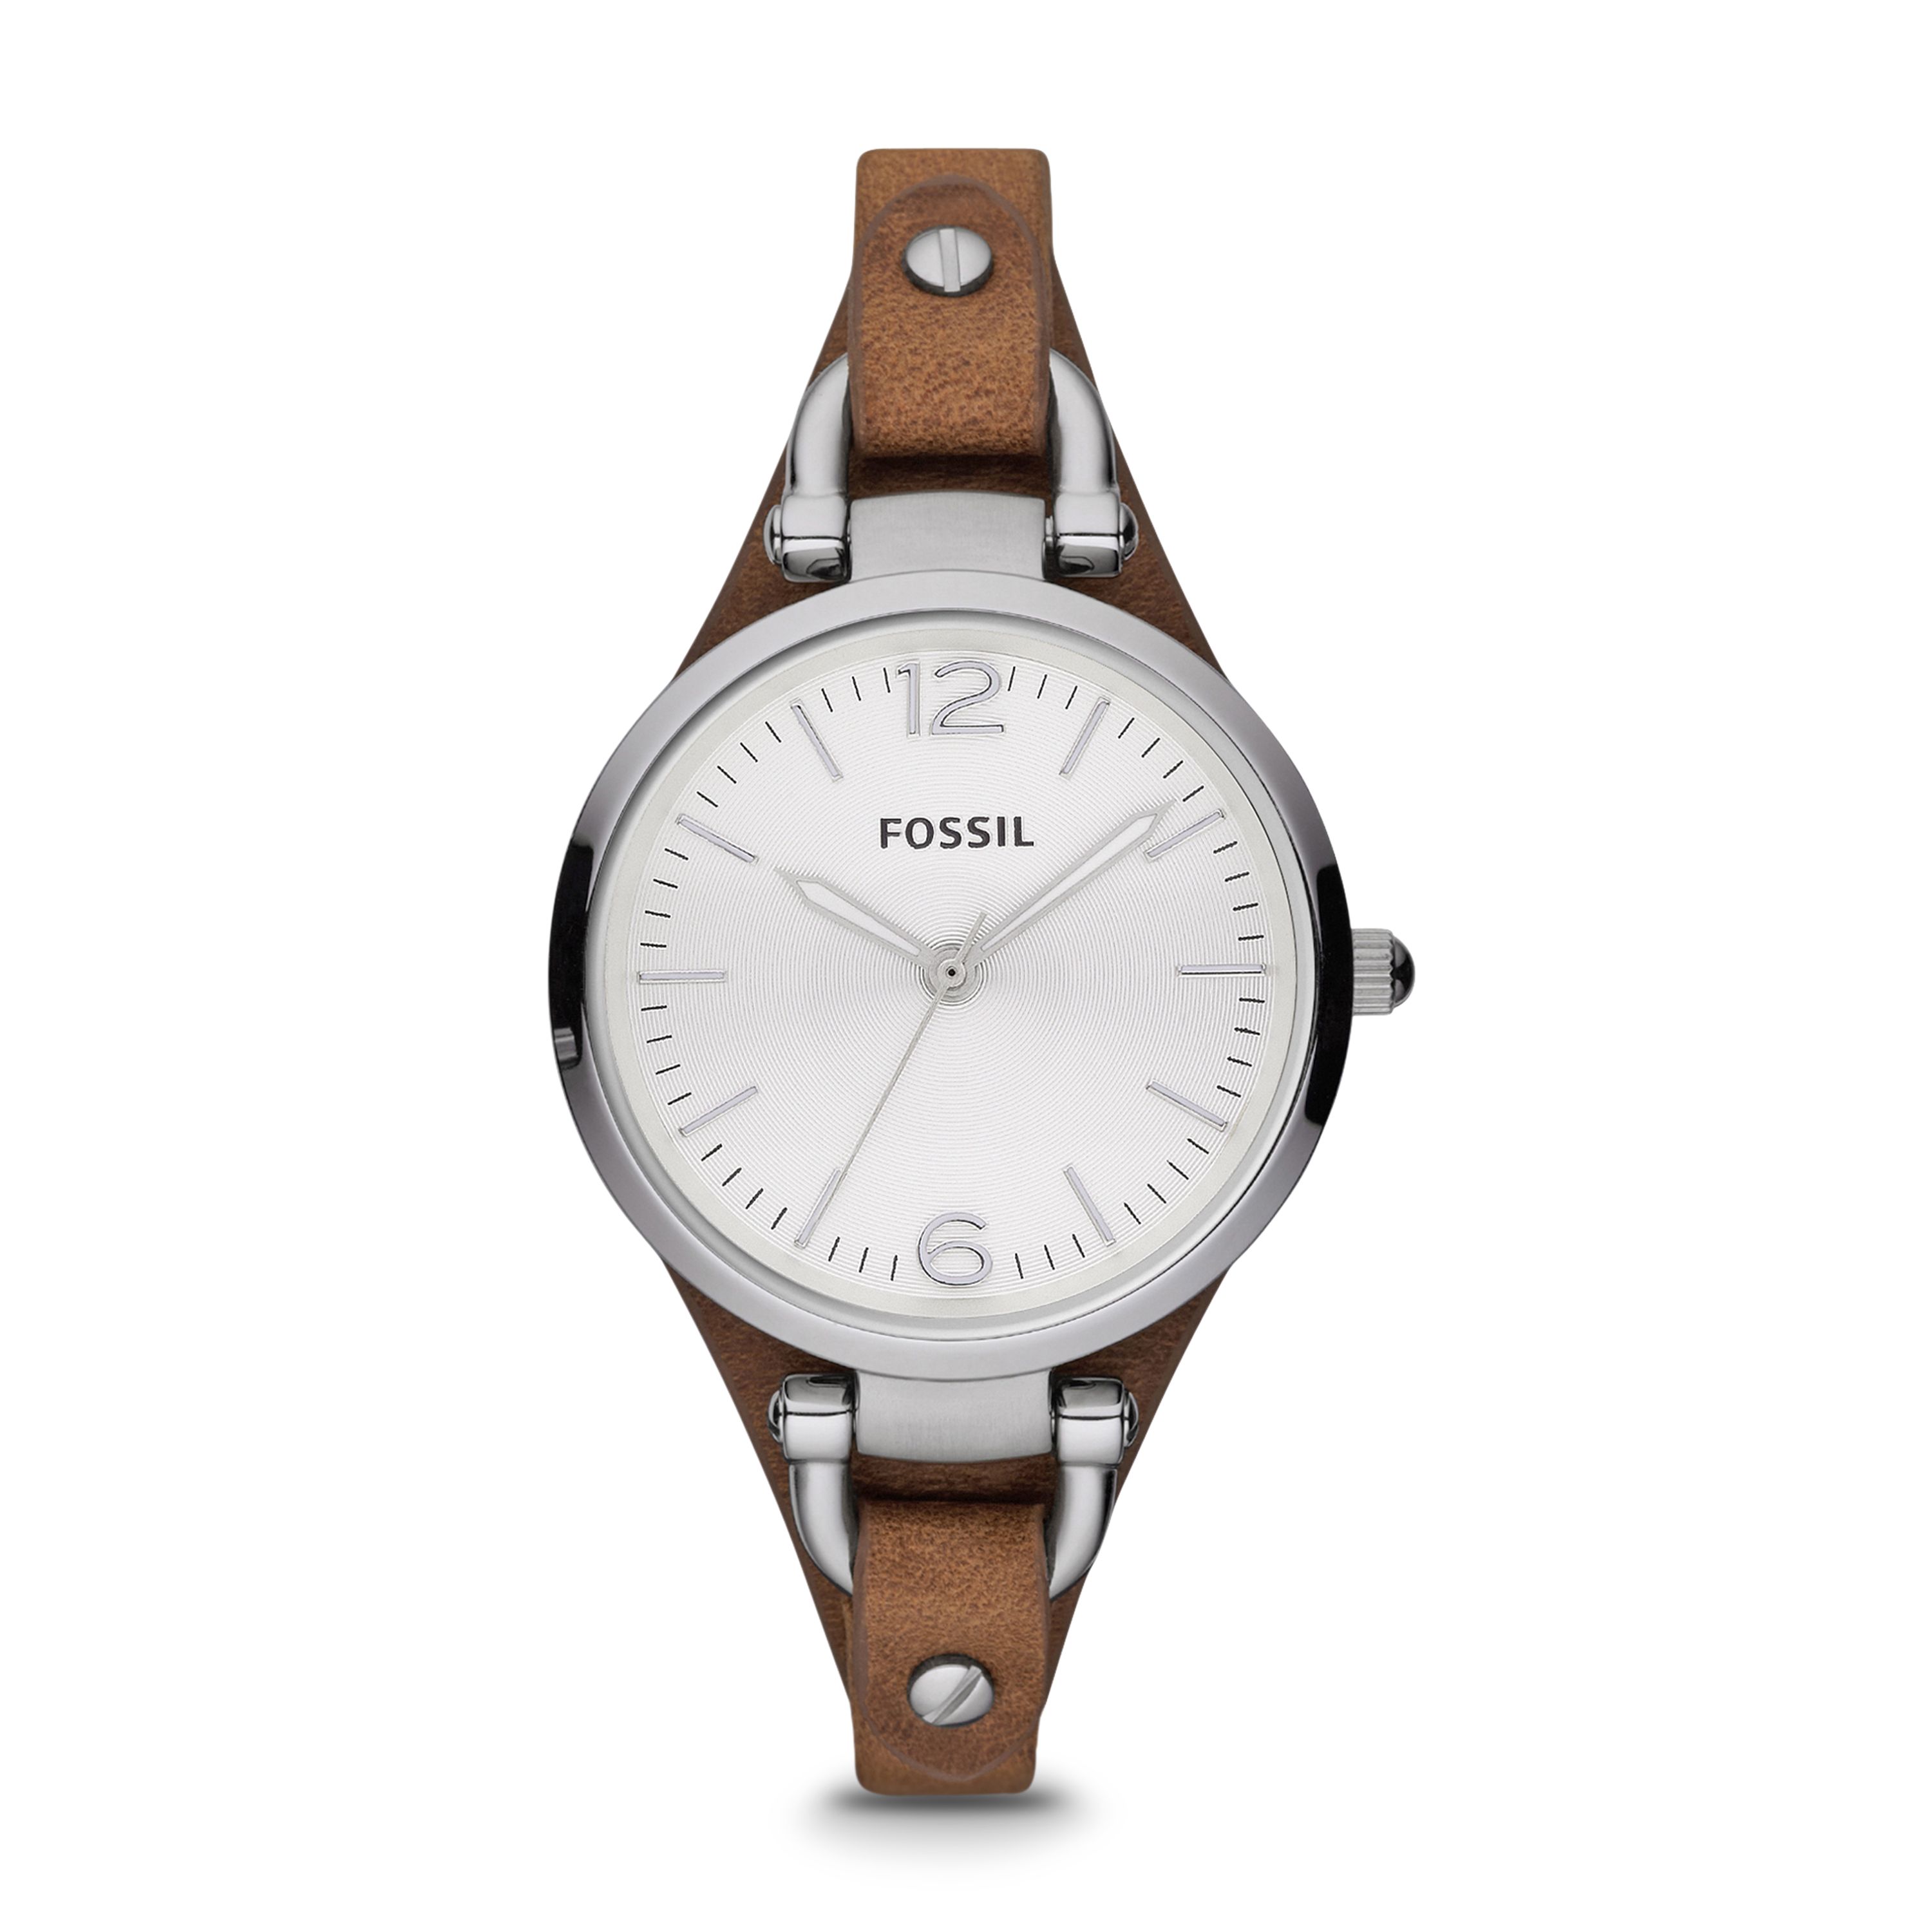 Fossil Women's Georgia Three-Hand Leather Watch (Style: ES3060)